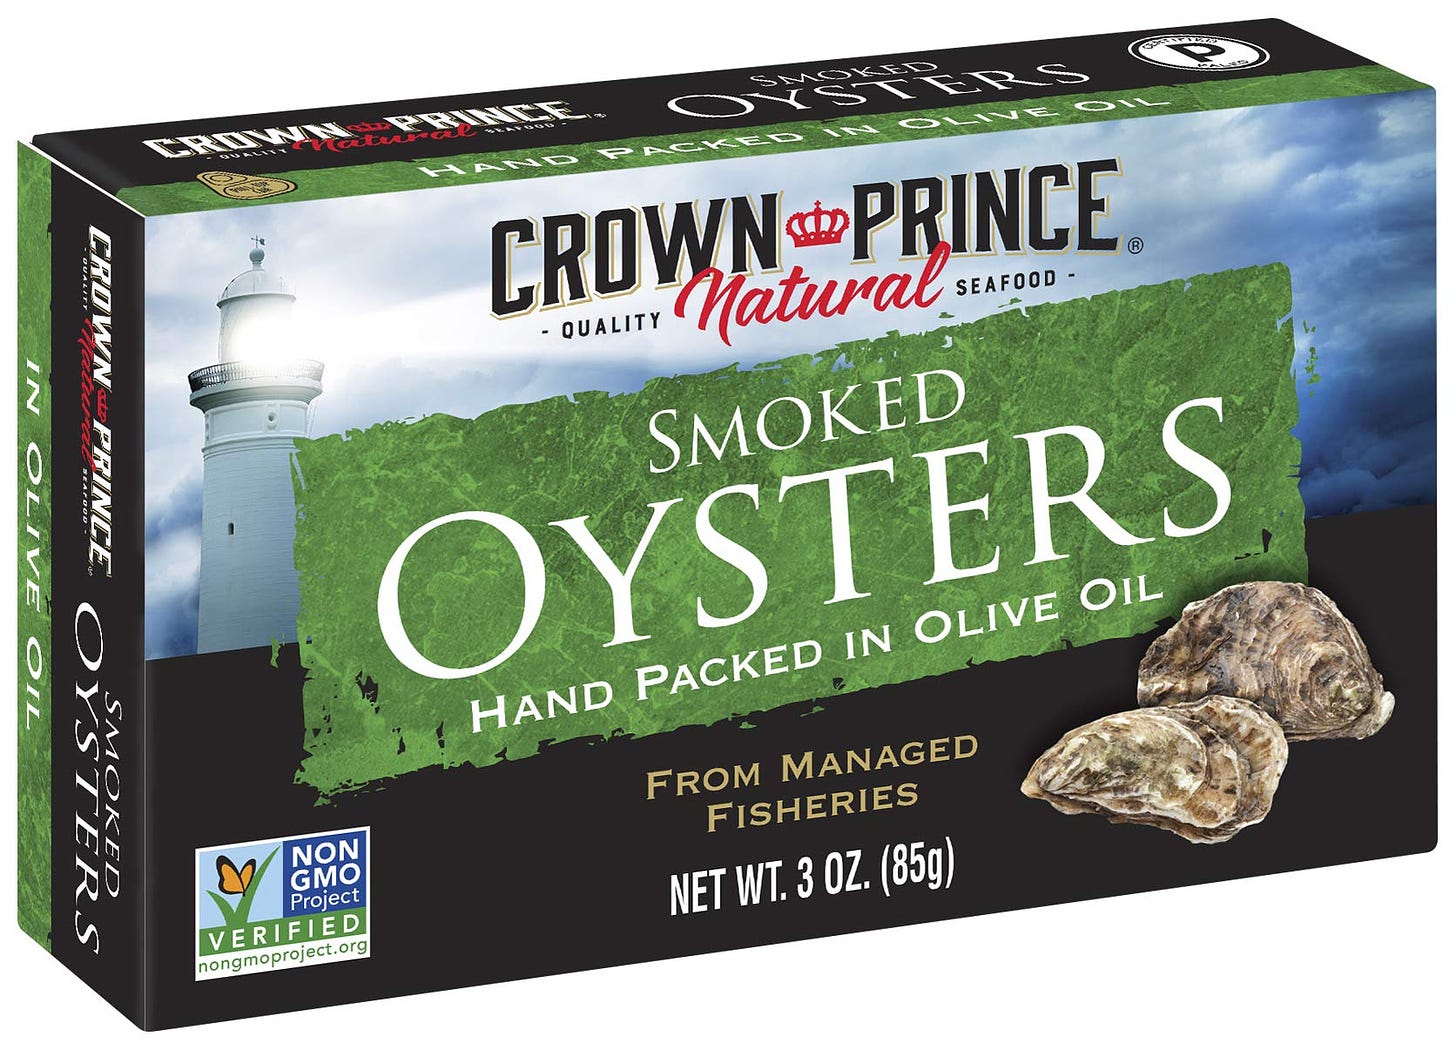 Amazon.com: Crown Prince Natural Smoked Oysters in Pure Olive Oil, 3-Ounce  Cans (Pack of 18) : Grocery & Gourmet Food